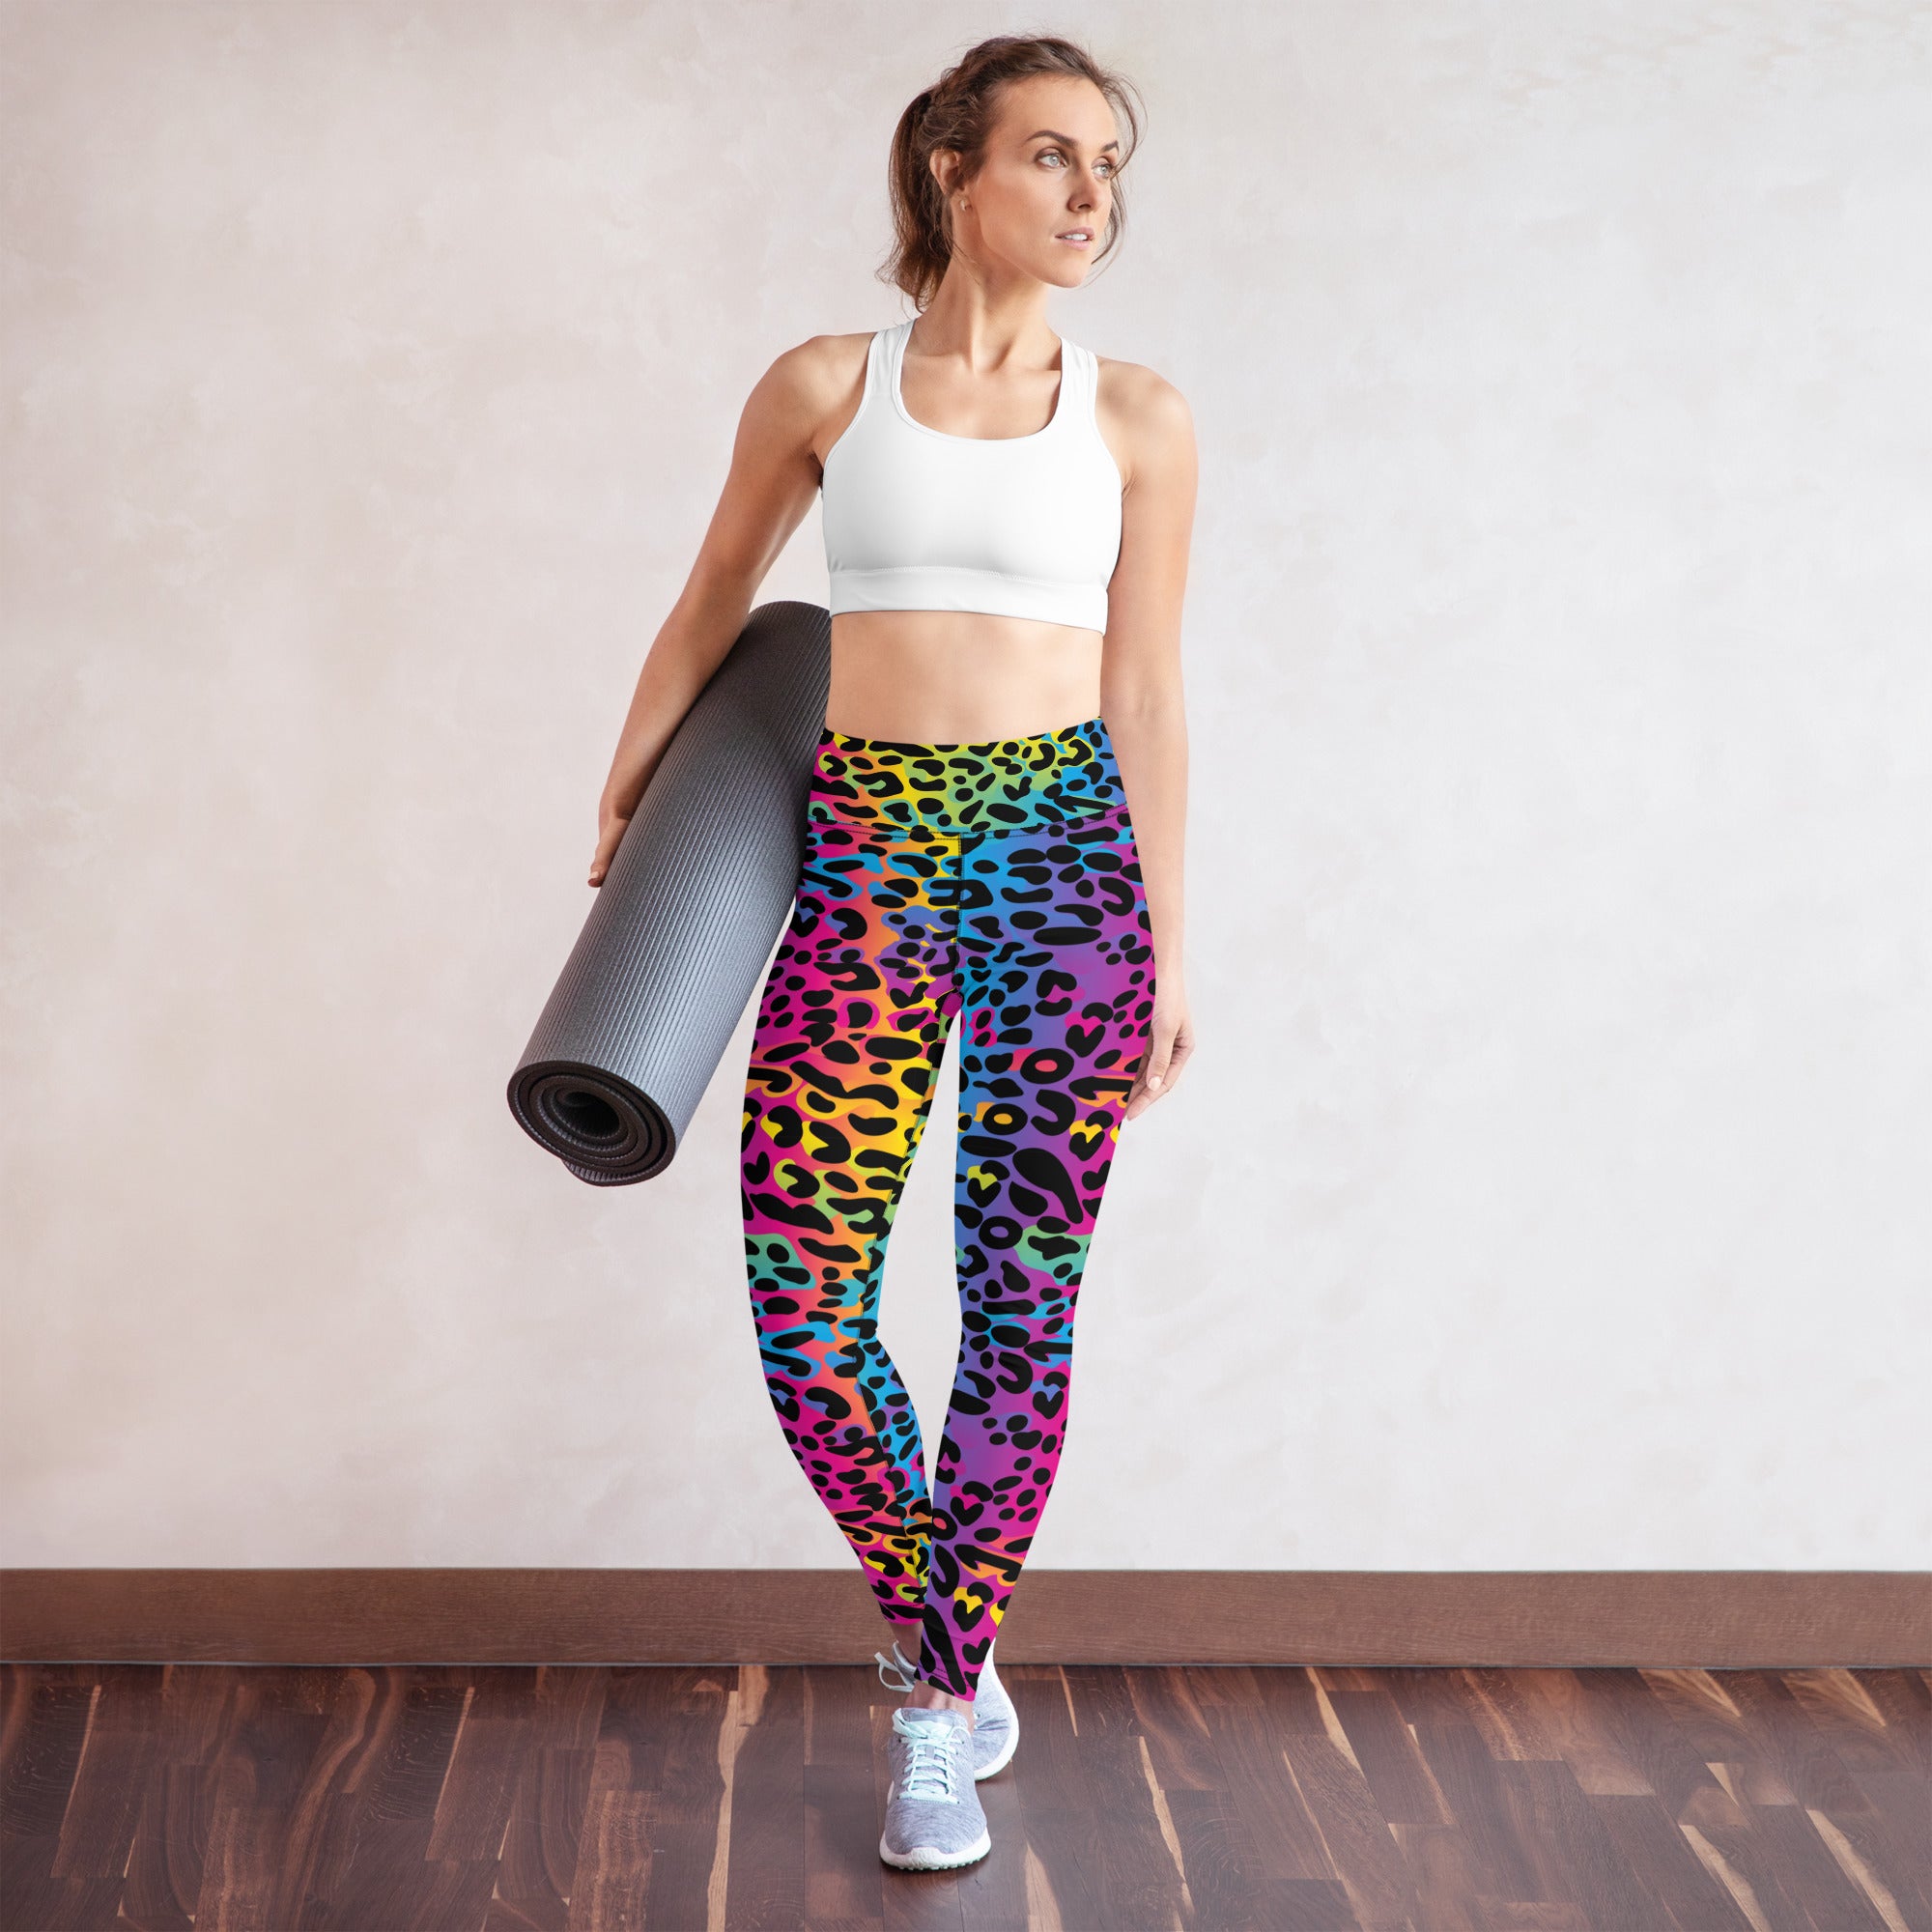 High Waisted Leopard Print Leopard Print Gym Leggings For Women  Fashionable, Sexy, And Push Up For Yoga, Gym, Workouts, Fitness, Or Sports  From Blossommg, $15.7 | DHgate.Com